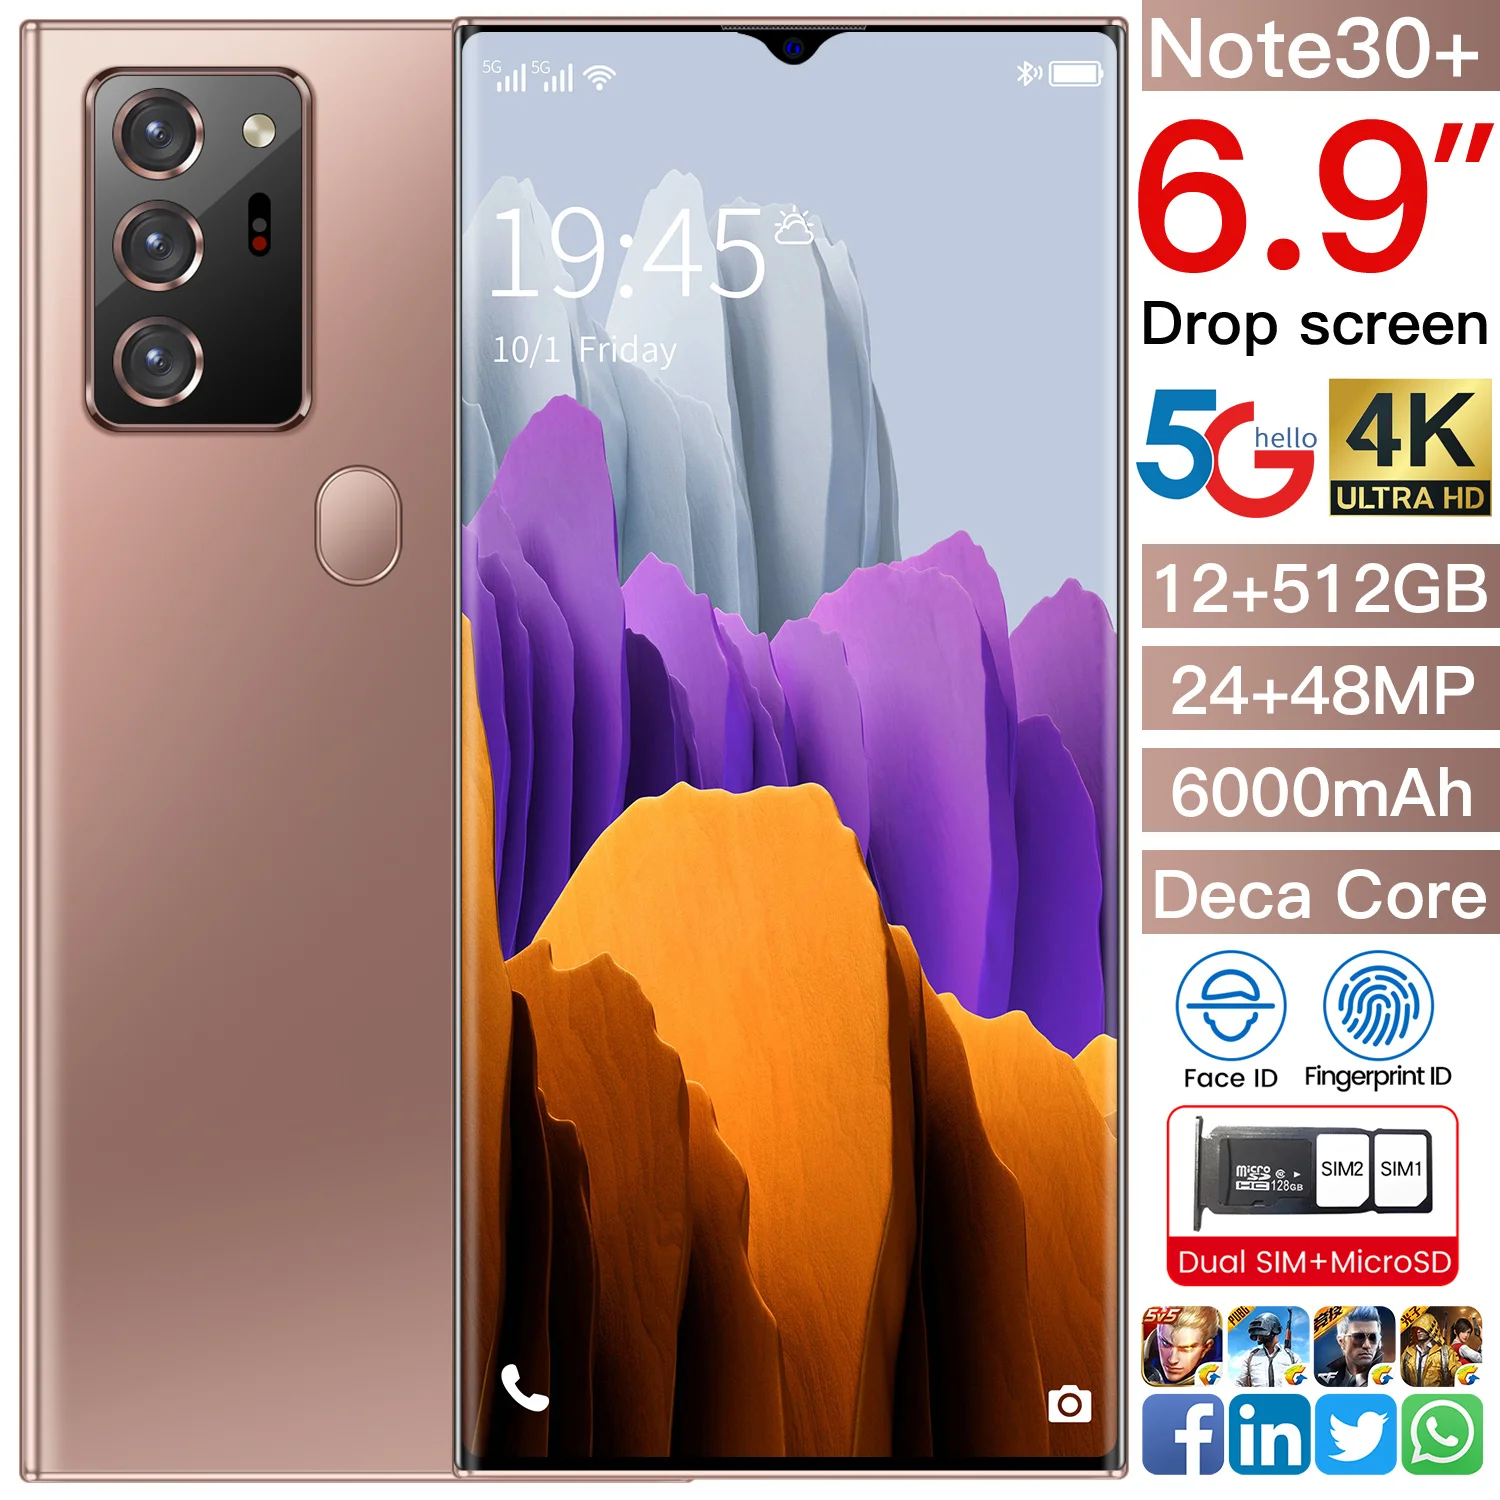 

2021 Newest 6.9" Galax Note30+ Mobile Phone Snapdragon 865 Android 10.0 12GB+512GB 6000mAh Fingerprint Unlock Smart Cellphone